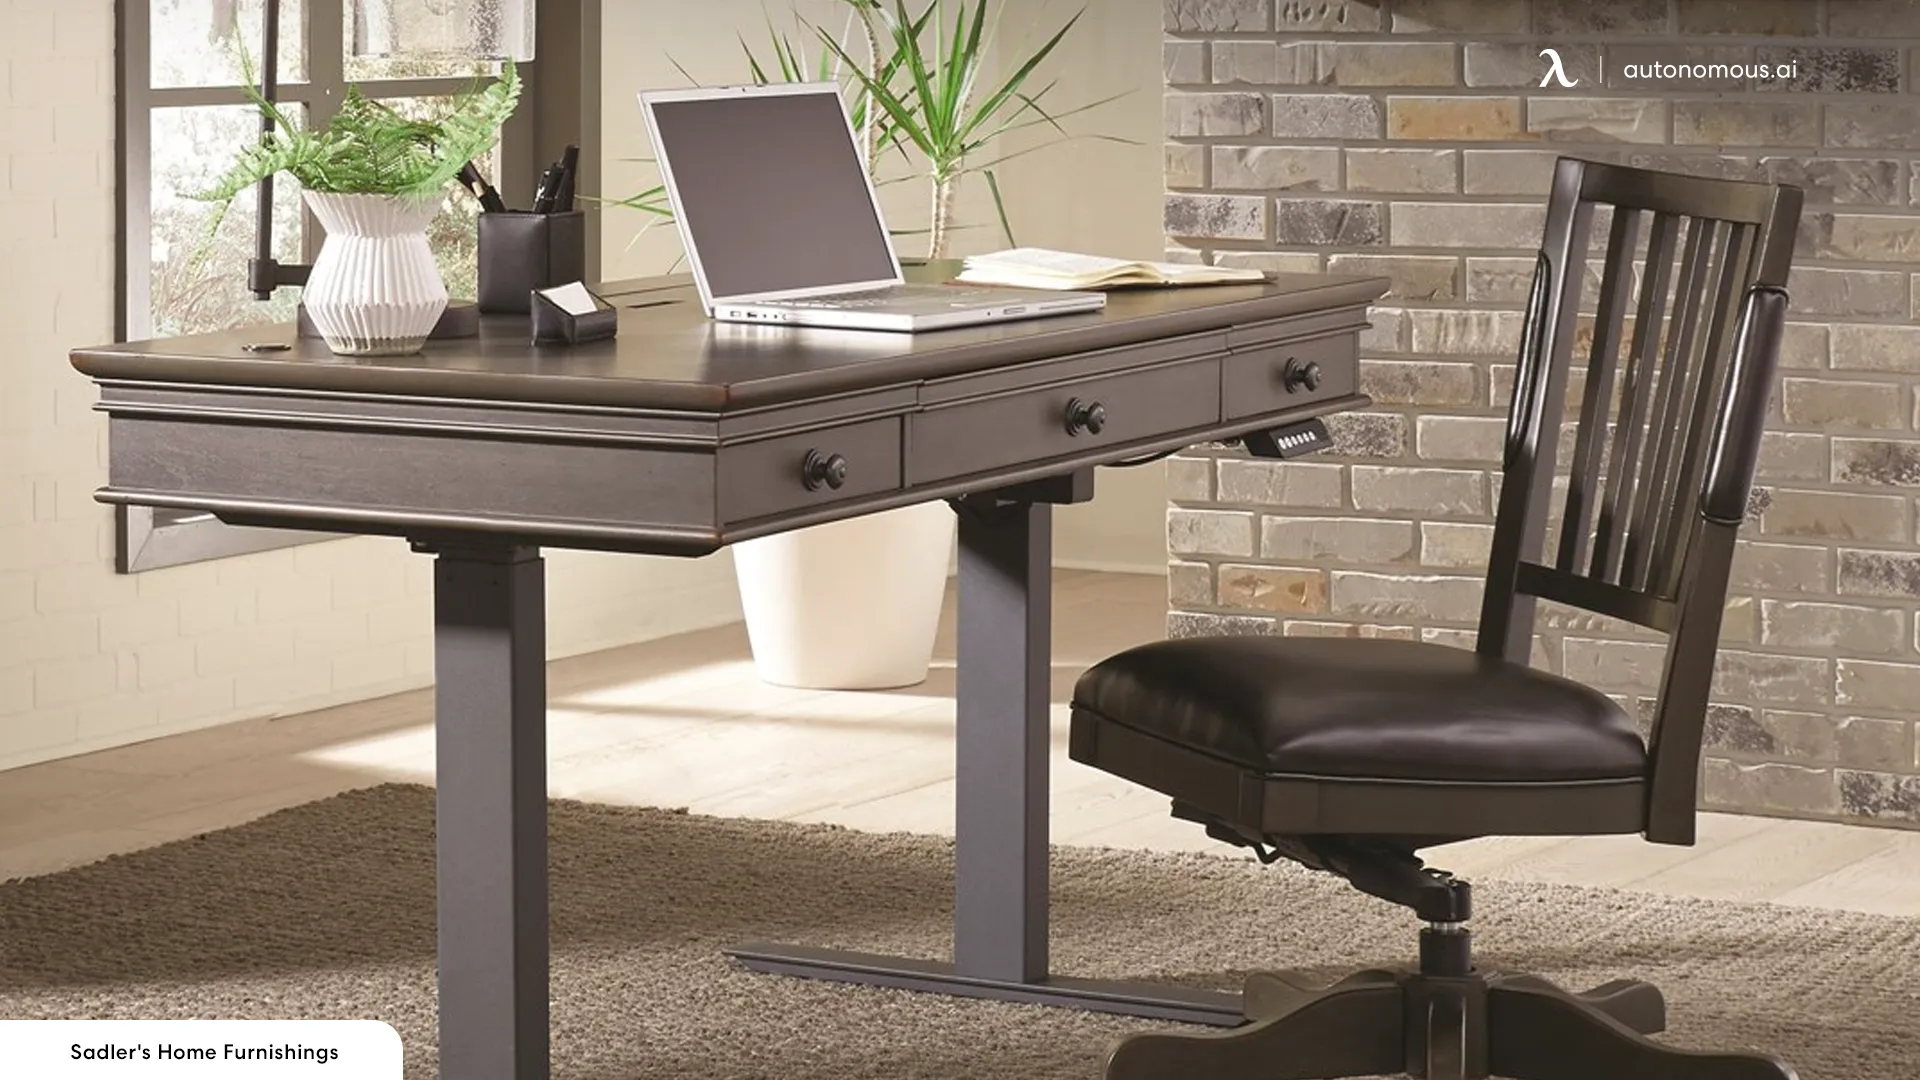 Maryland Office Furniture - office furniture Baltimore